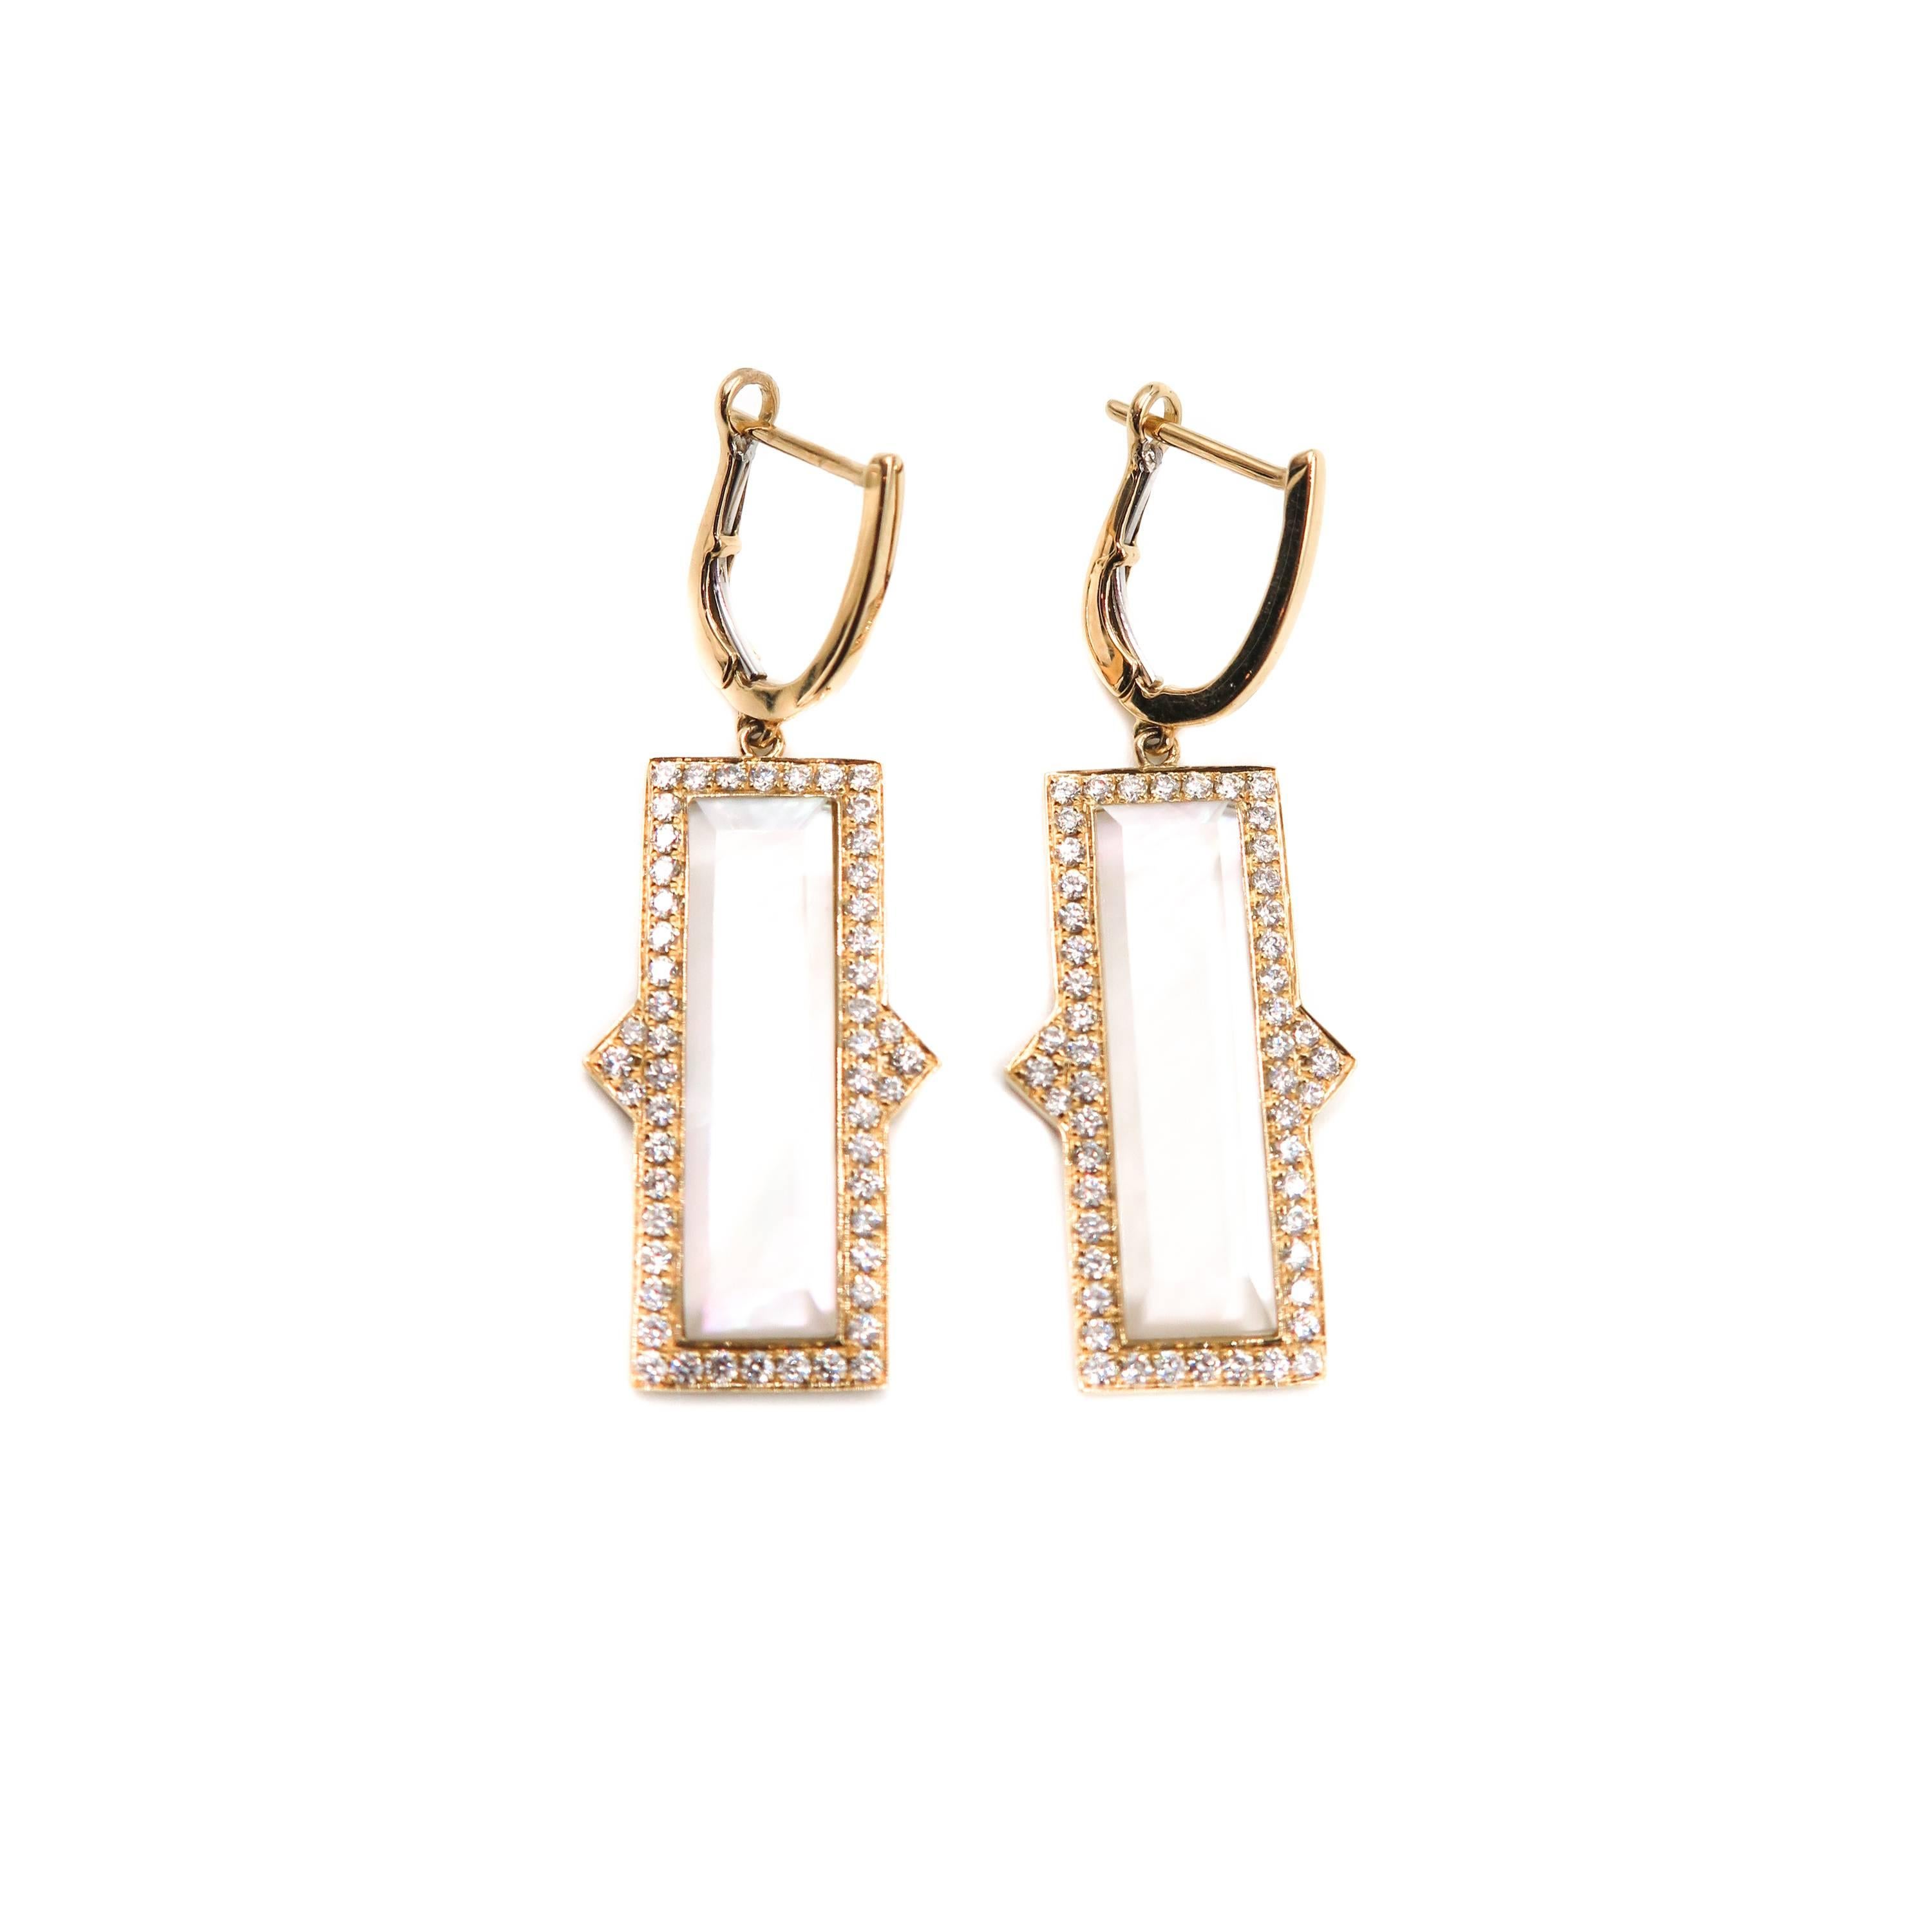 Artist Mother-of-Pearl, Quartz and Diamond Yellow Gold Drop Earrings